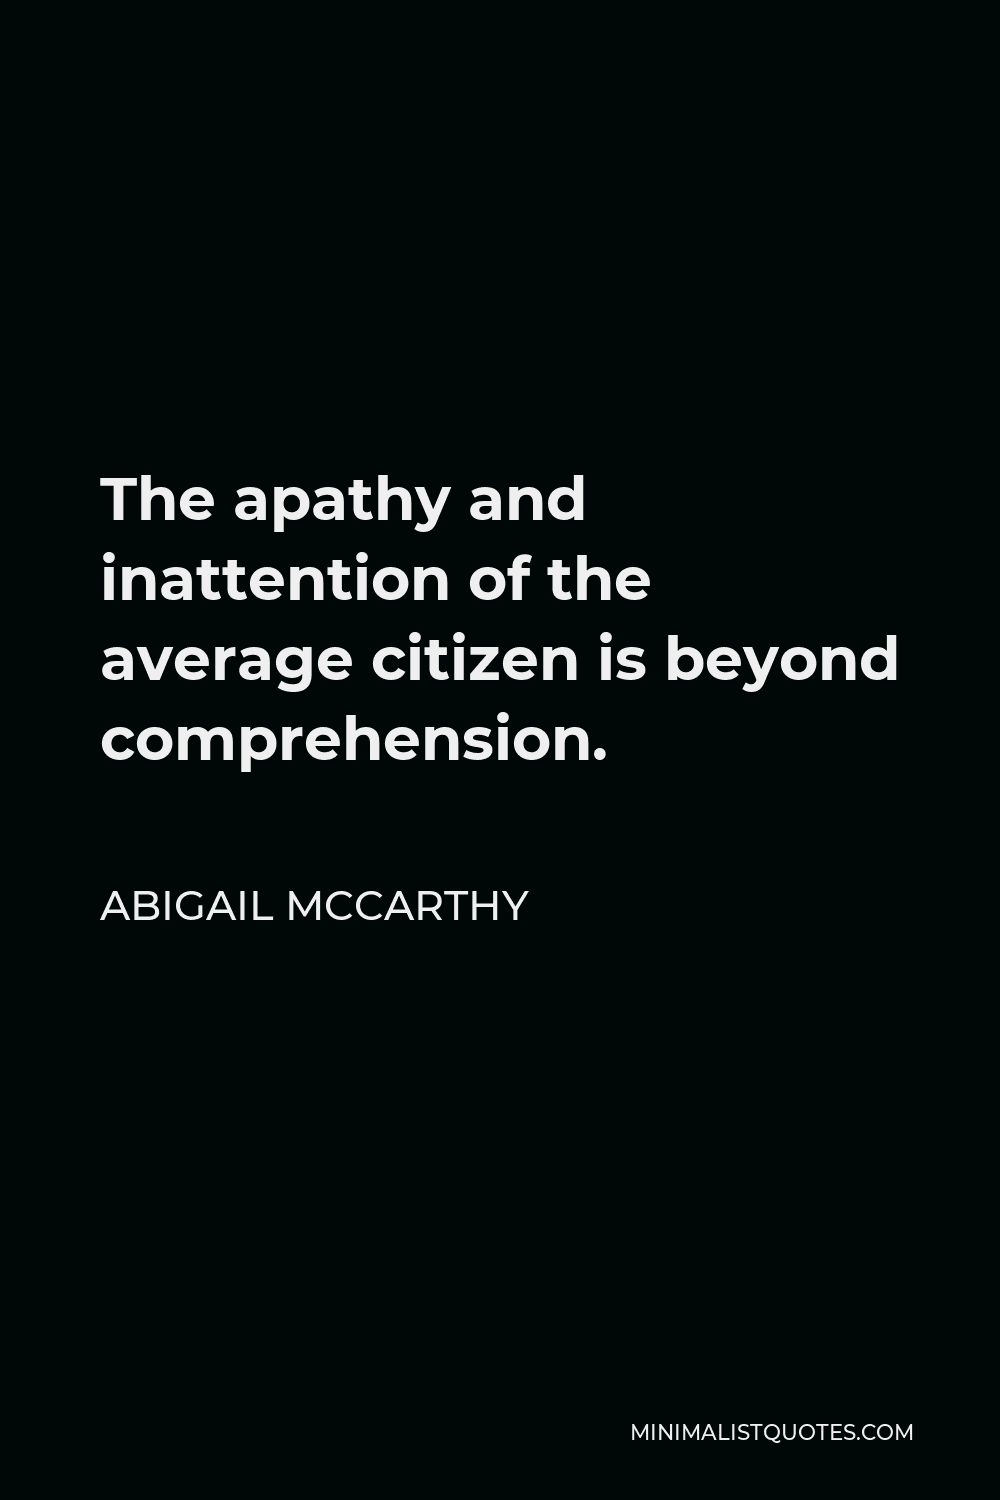 Abigail McCarthy Quote - The apathy and inattention of the average citizen is beyond comprehension.